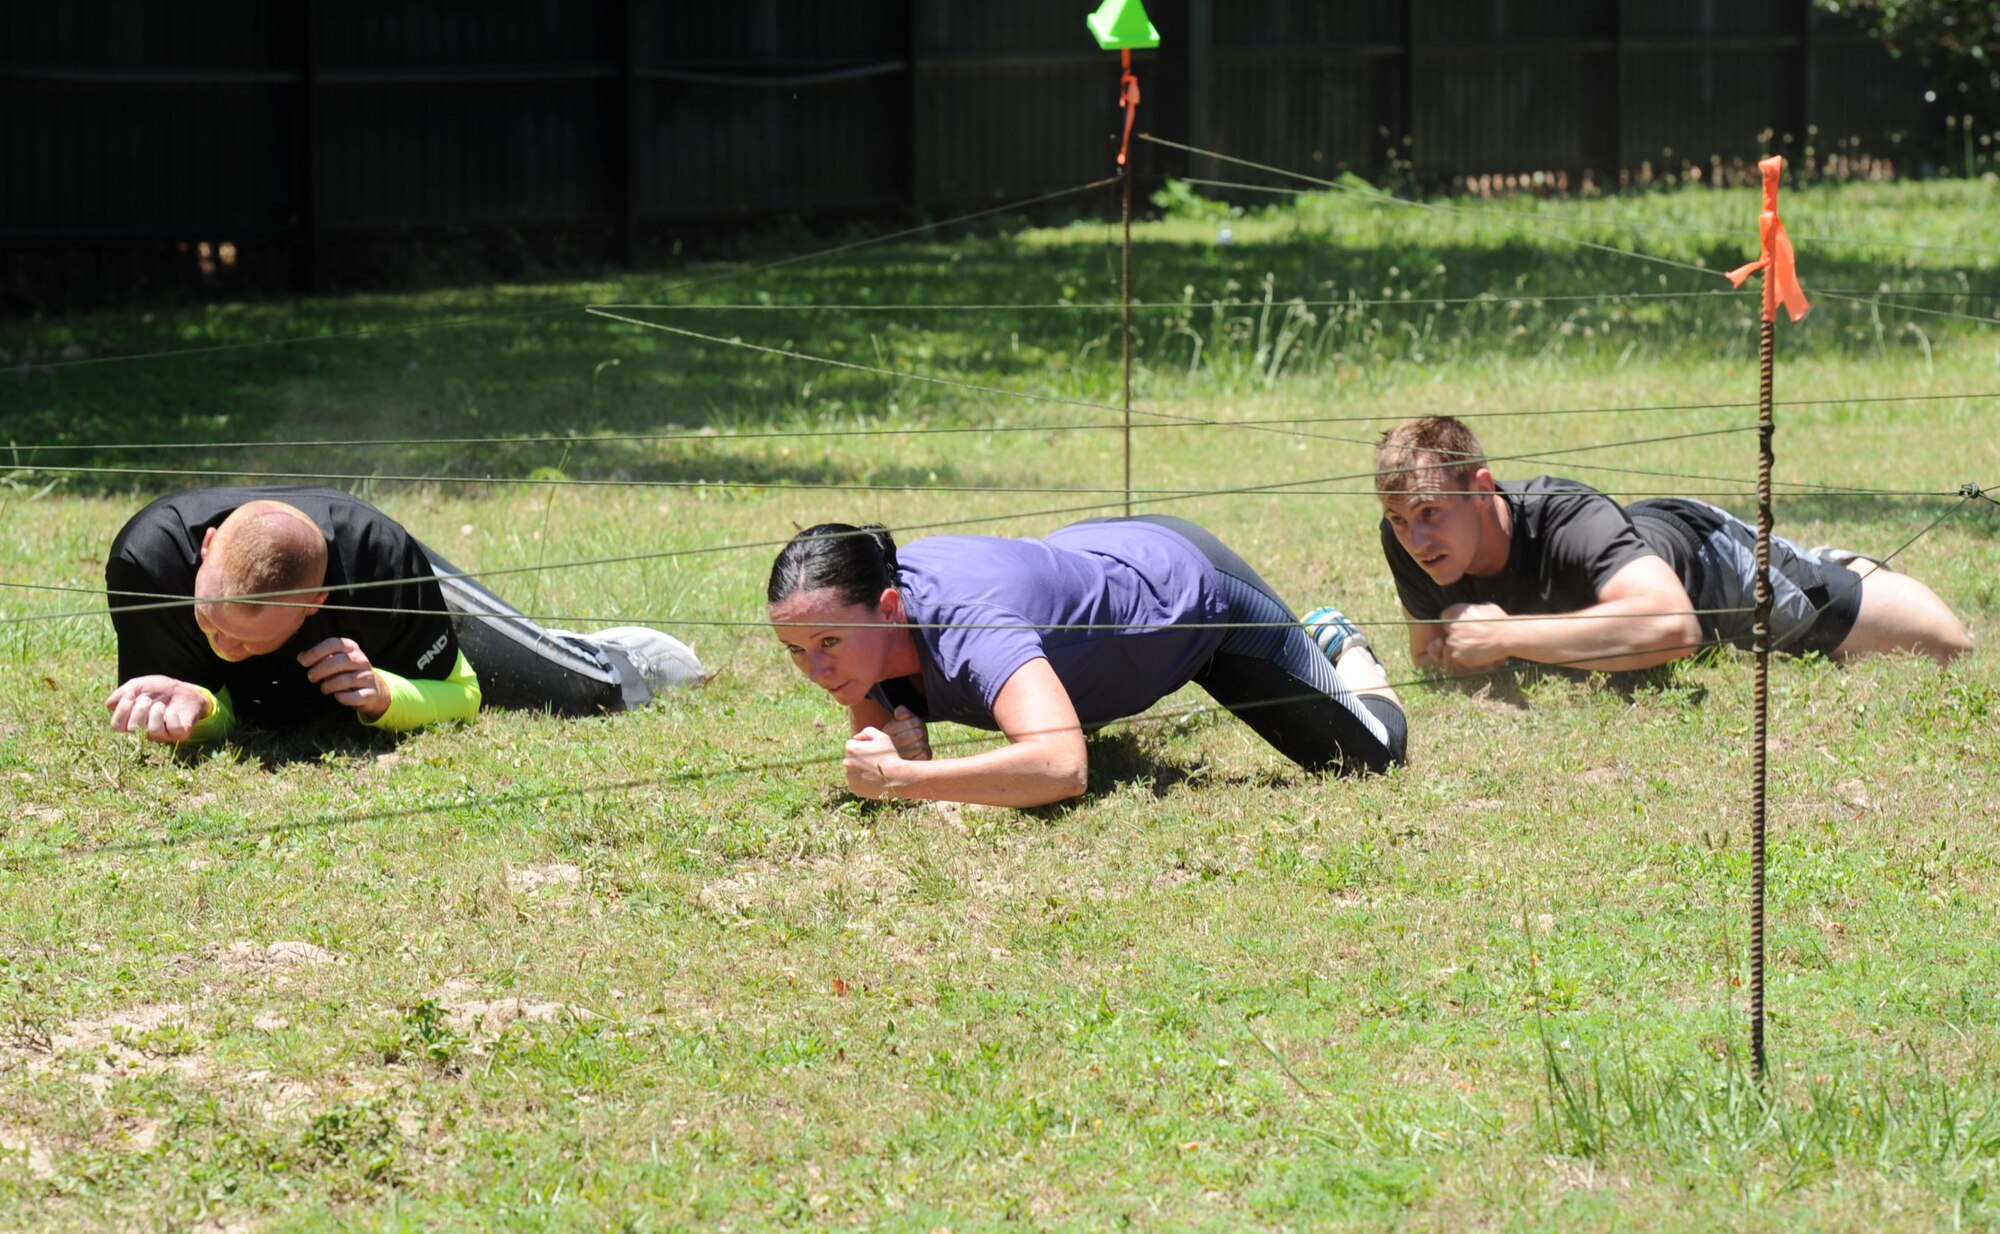 81st Medical Operations Squadron Team 2 members participate in the low crawl portion during the 81st Security Forces Squadron obstacle course competition May 16, 2017, on Keesler Air Force Base, Miss. The competition was held during National Police Week, which recognizes the service of law enforcement men and women. (U.S. Air Force photo by Kemberly Groue)